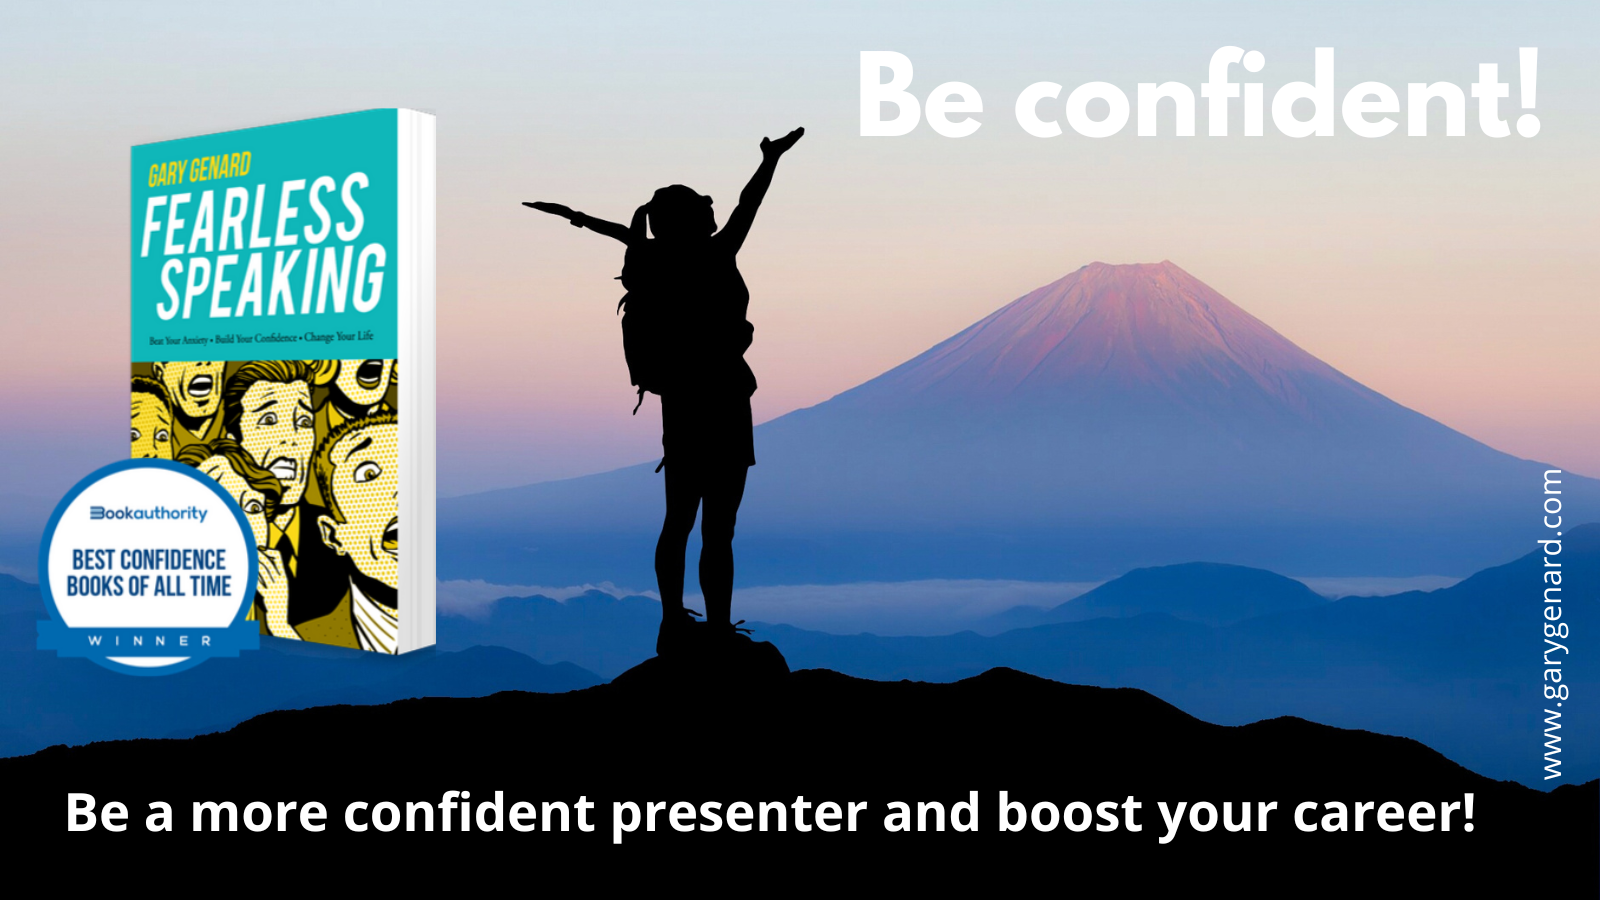 Learn how to improve your confidence for public speaking with Dr. Gary Genard's book, Fearless Speaking.